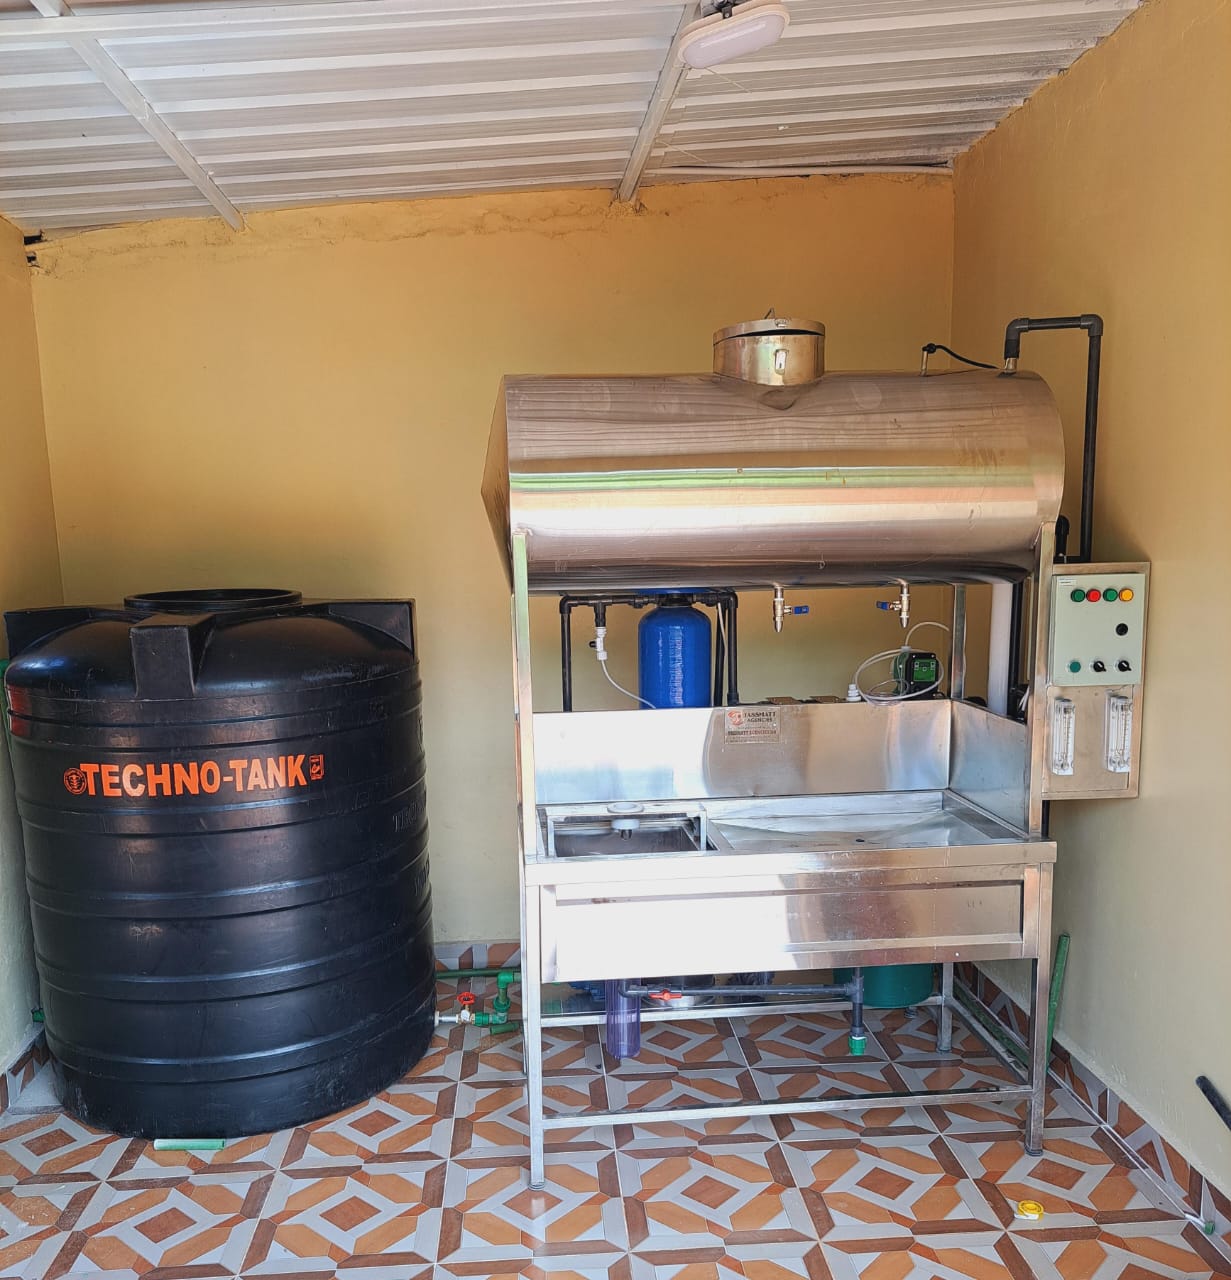 Kitui Entrepreneur Churns Crystal Clear Water with Tassmatt's Three-in-One Purification System